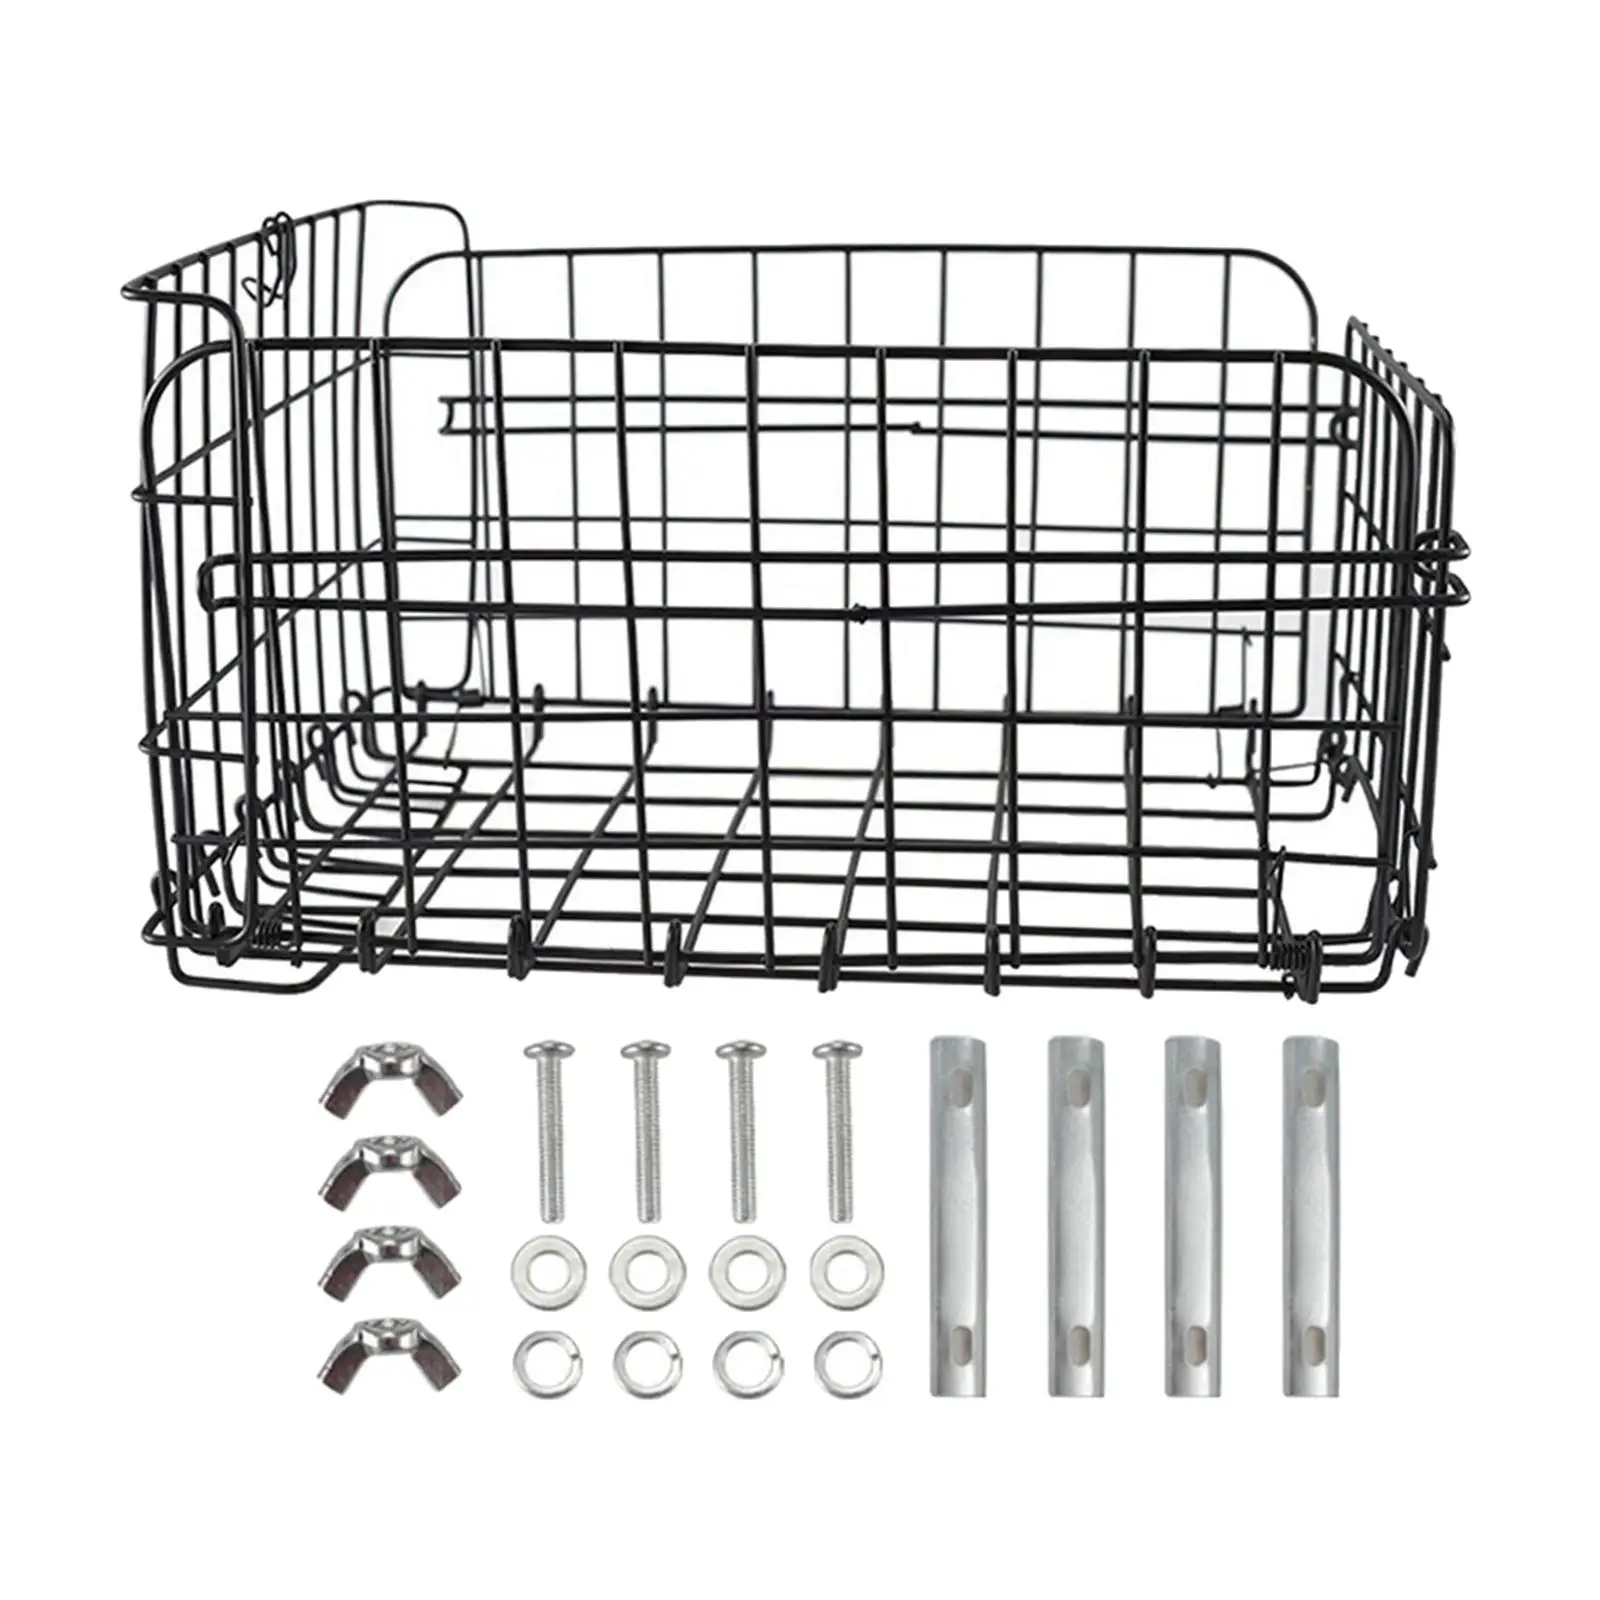 Thicken Bike Front Basket Foldable Hanging Cycling Baskets for Both Front or Rear with Mesh Bottom Easily Install Universal